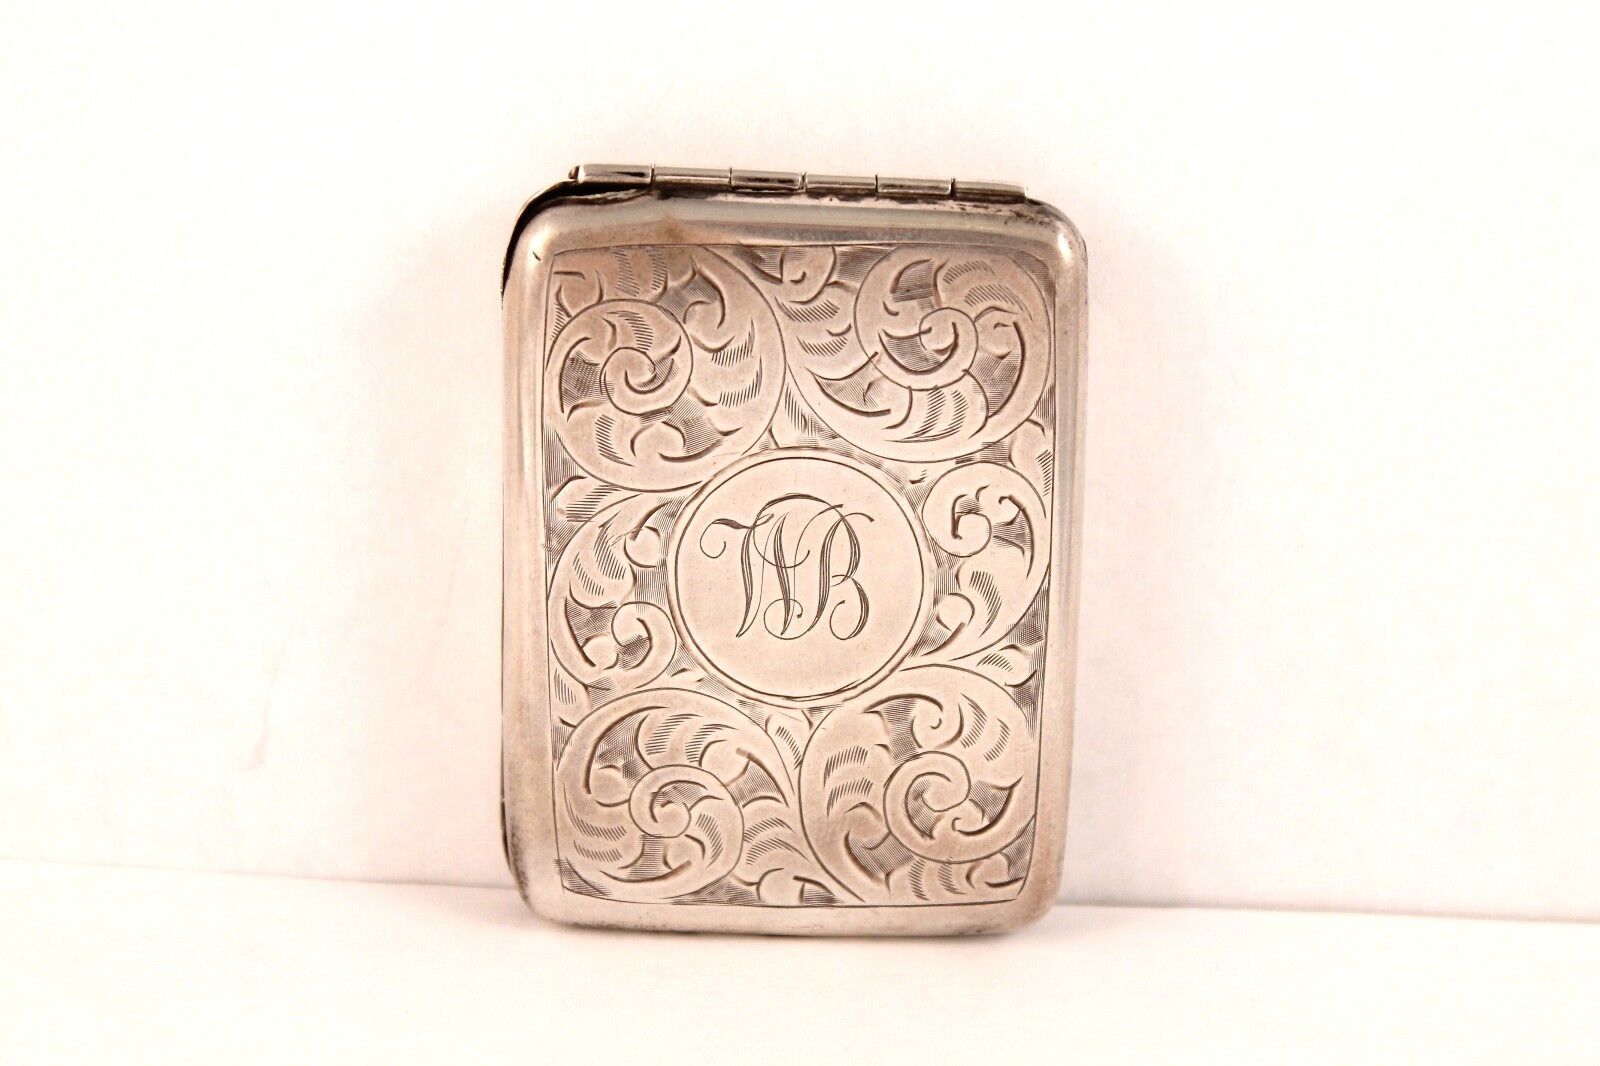 19th century sterling silver compact ornate scrolled 28 grams